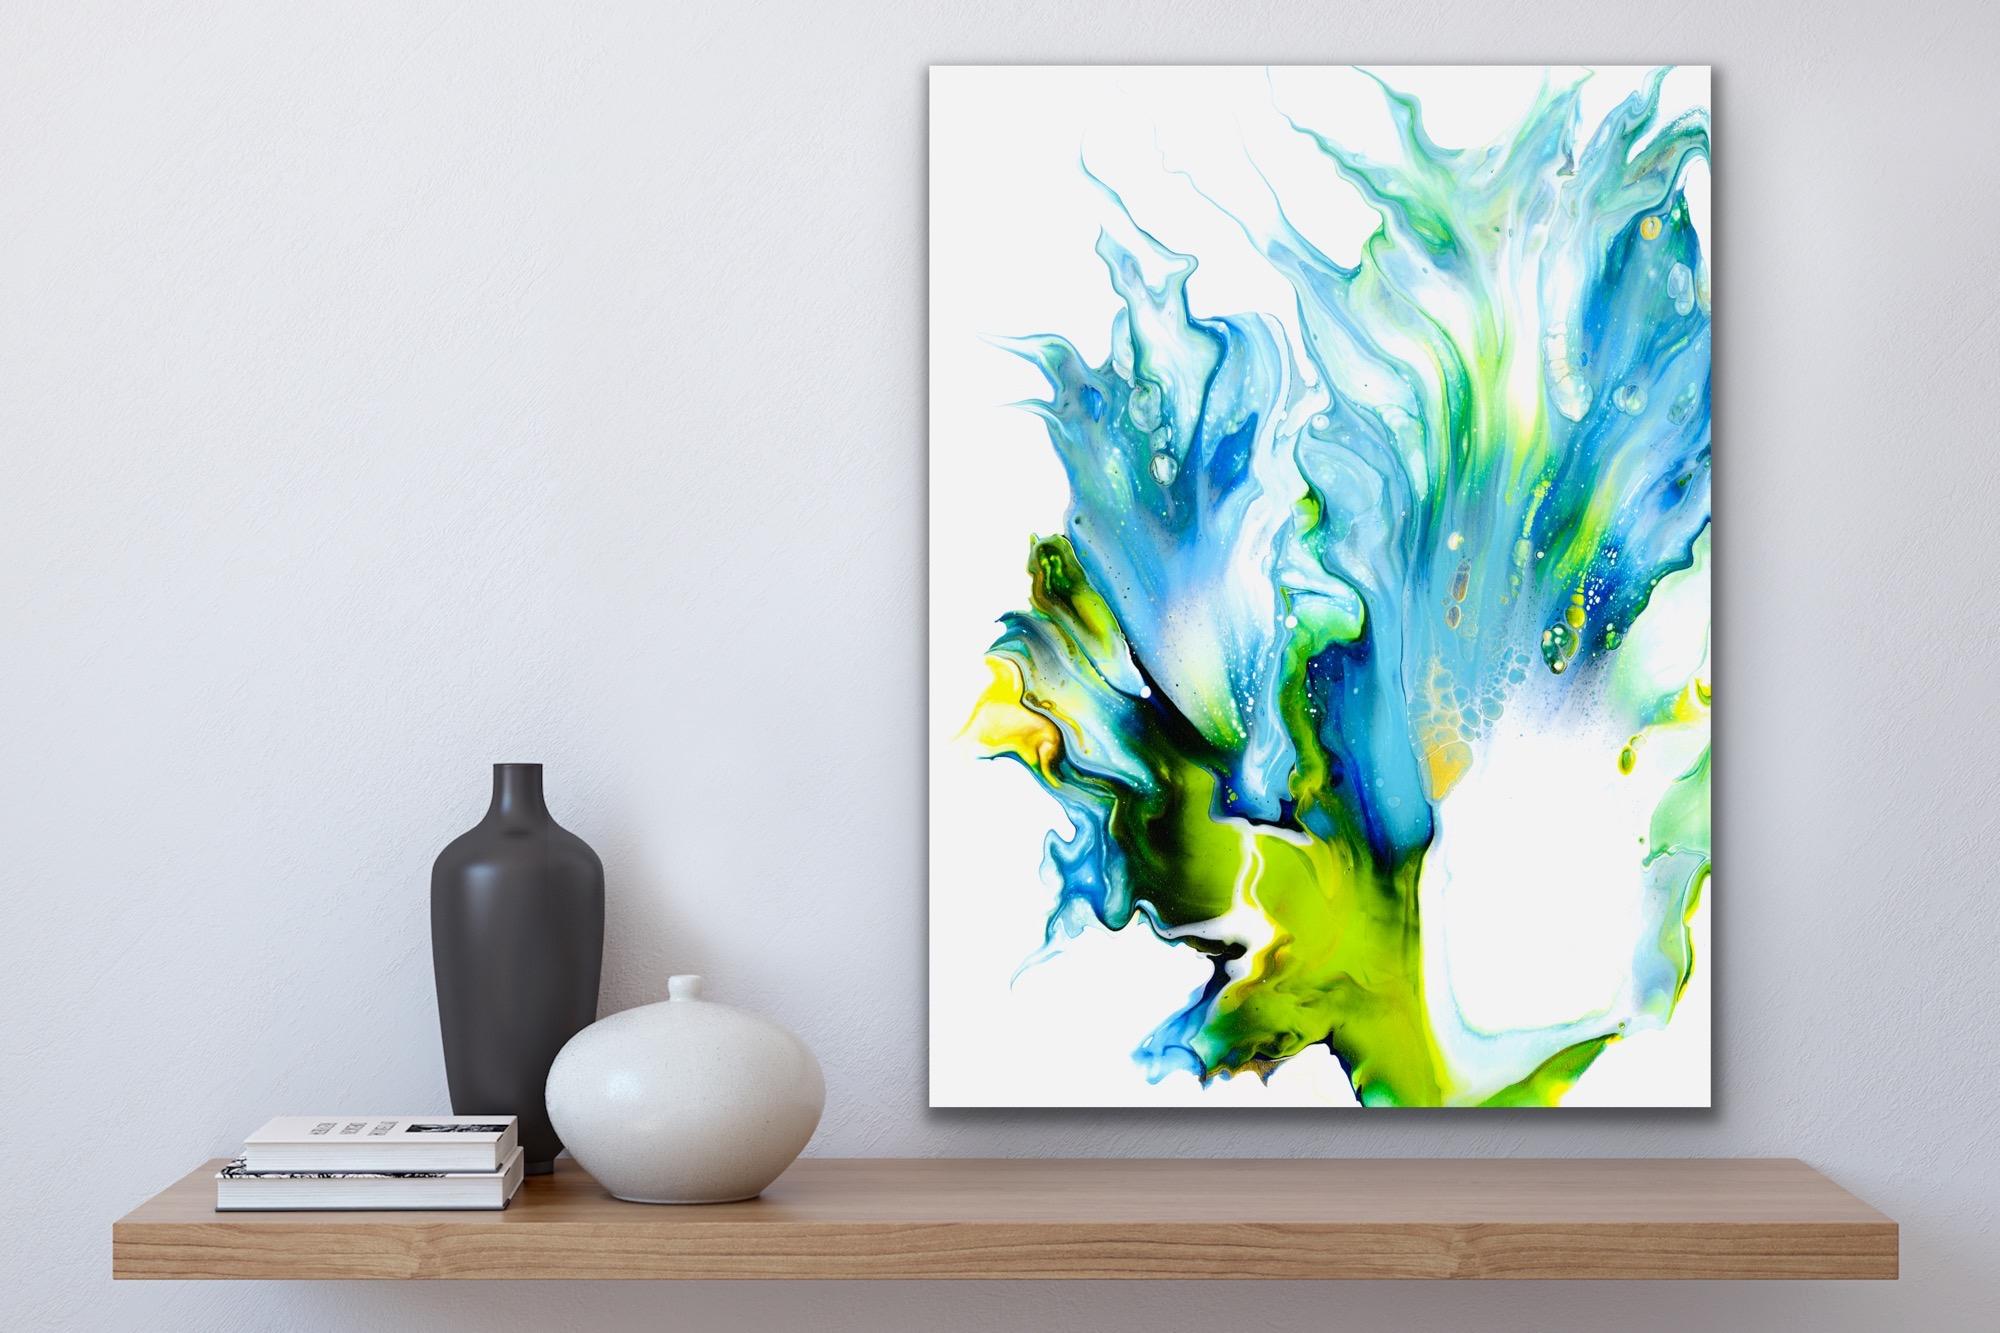 Contemporary Modern Abstract, Giclee Print on Metal, Limited Edition, by Cessy  For Sale 3